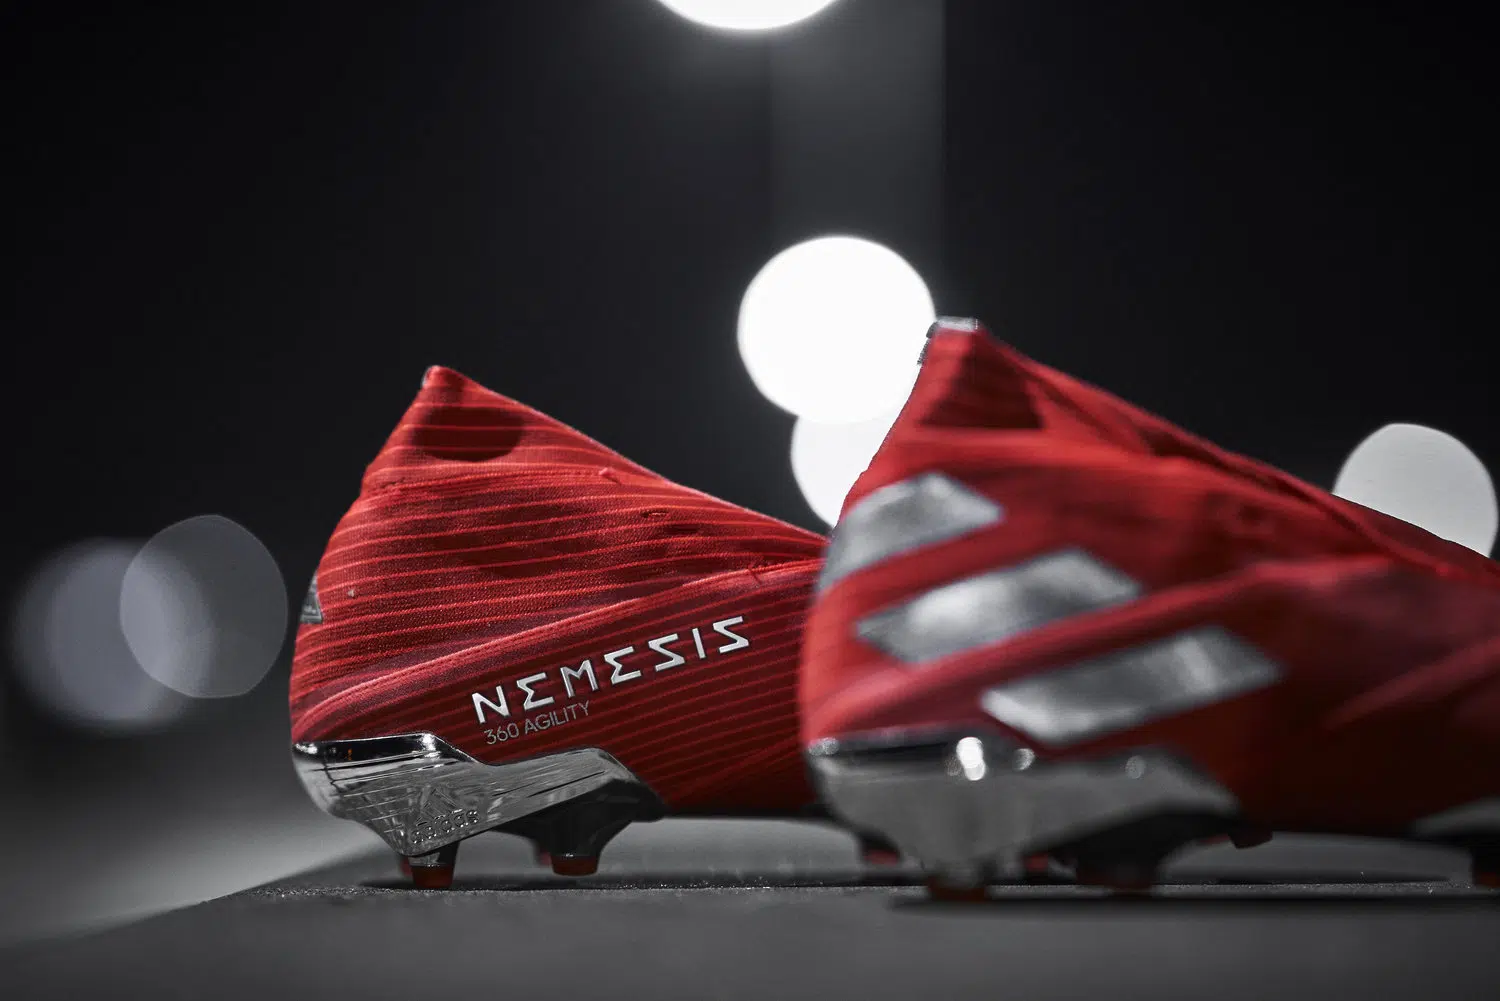 Adidas Football Boots: Precision, Performance, and Iconic Style